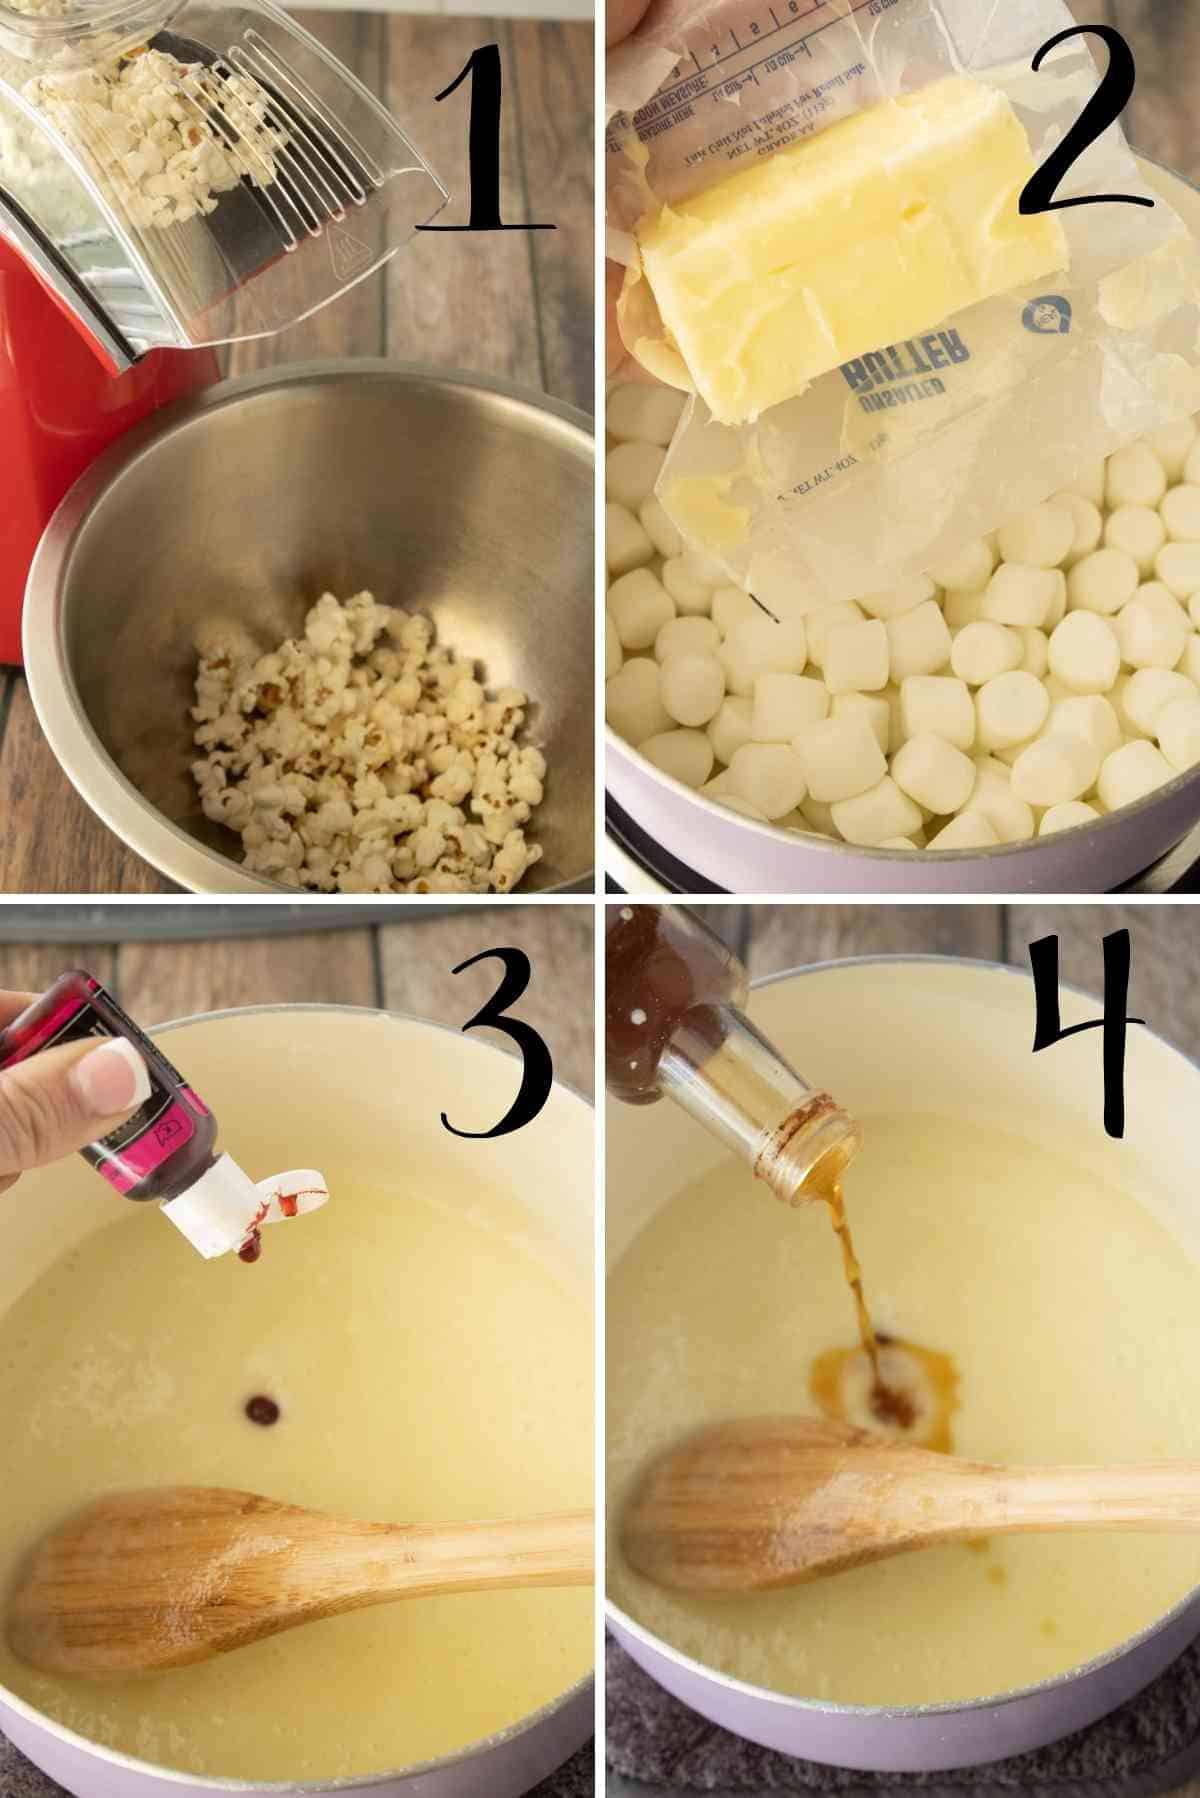 Pop some popcorn and make the marshmallow coating.